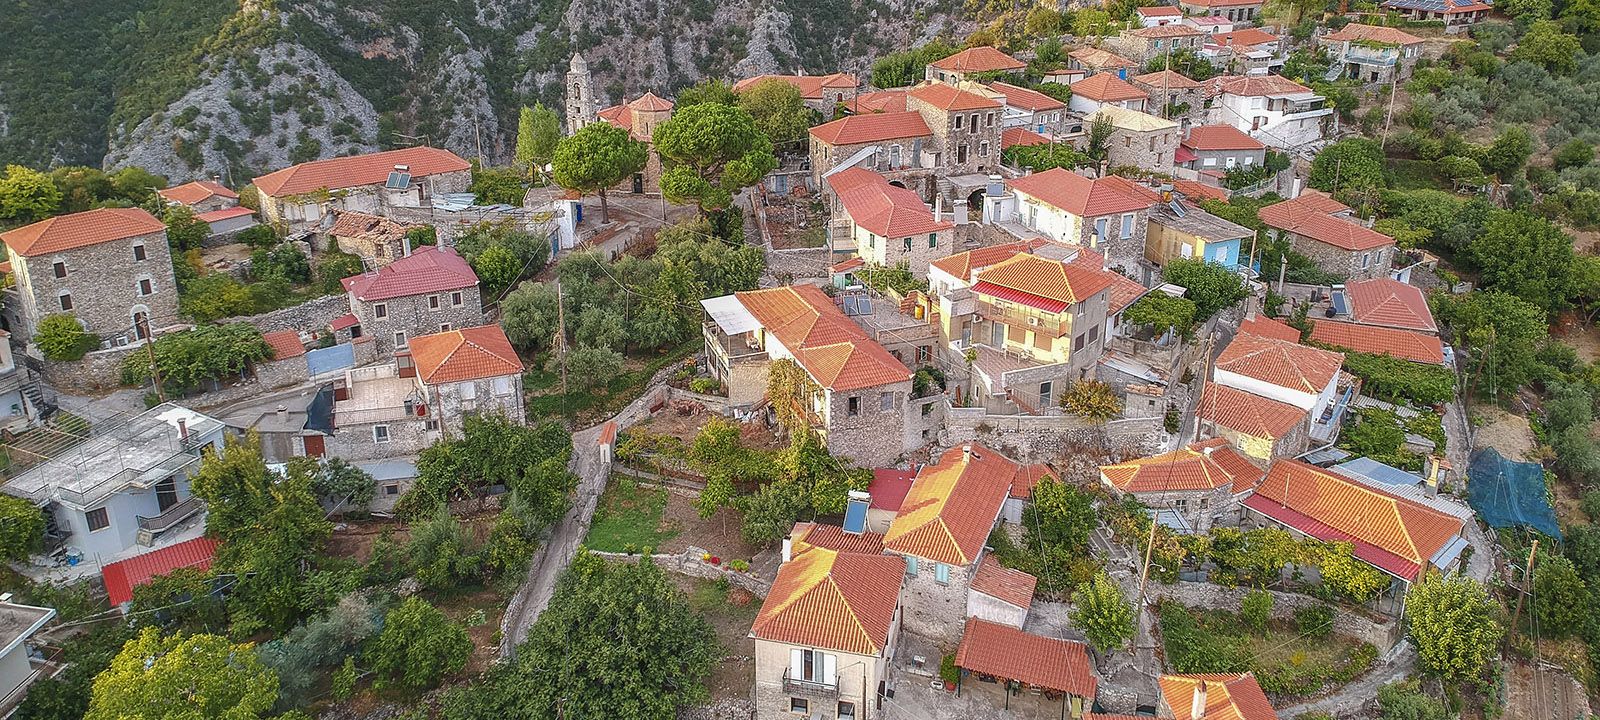 The Peloponnese destination for an excursion with Greek Adventures